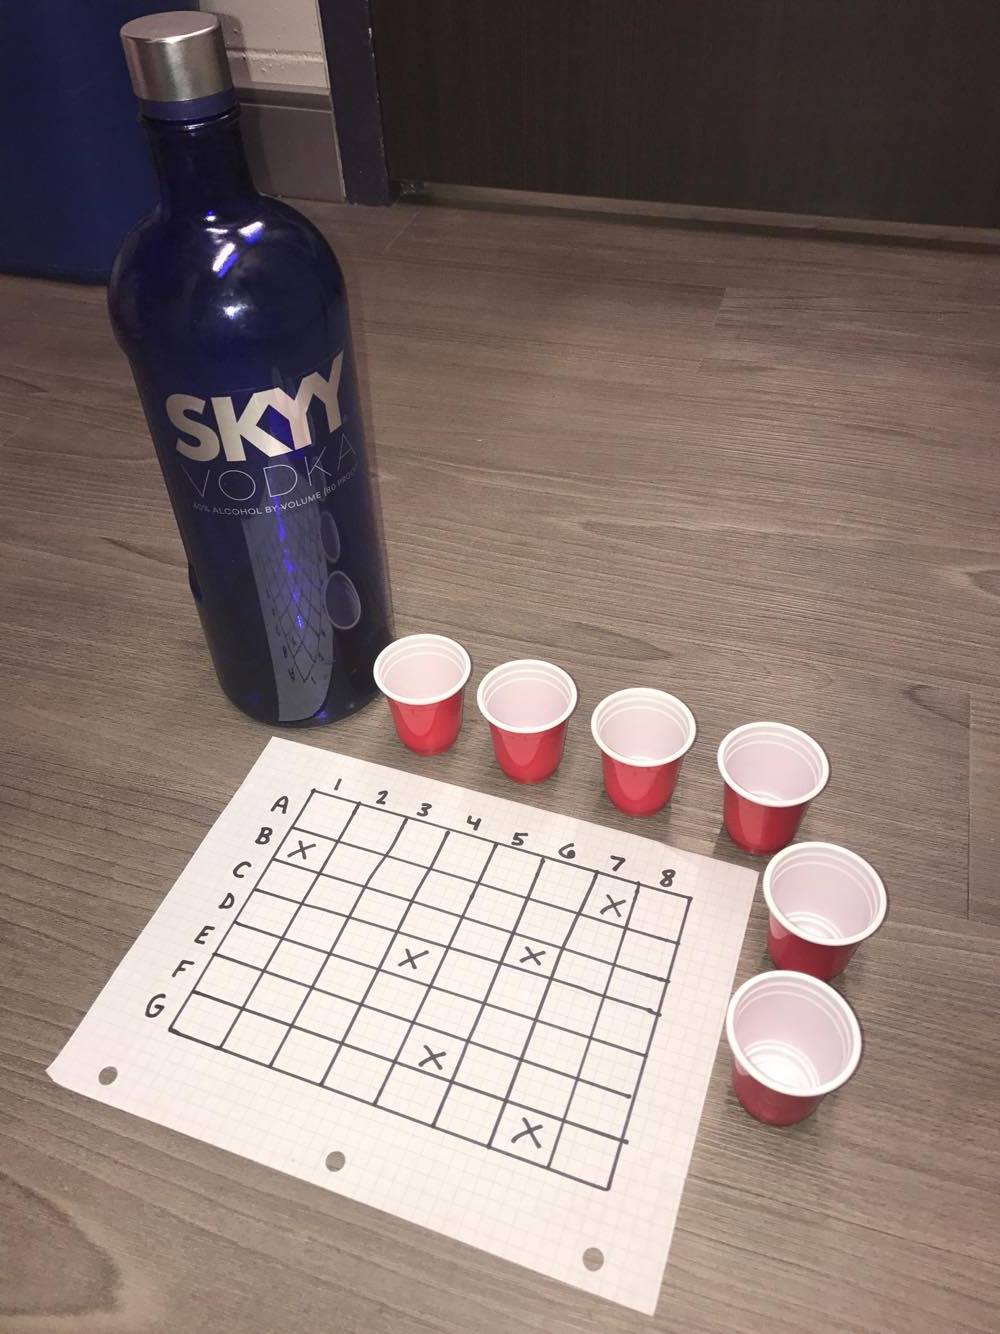 7 Drinking Games For 2 People That Are Seriously Fun To Play